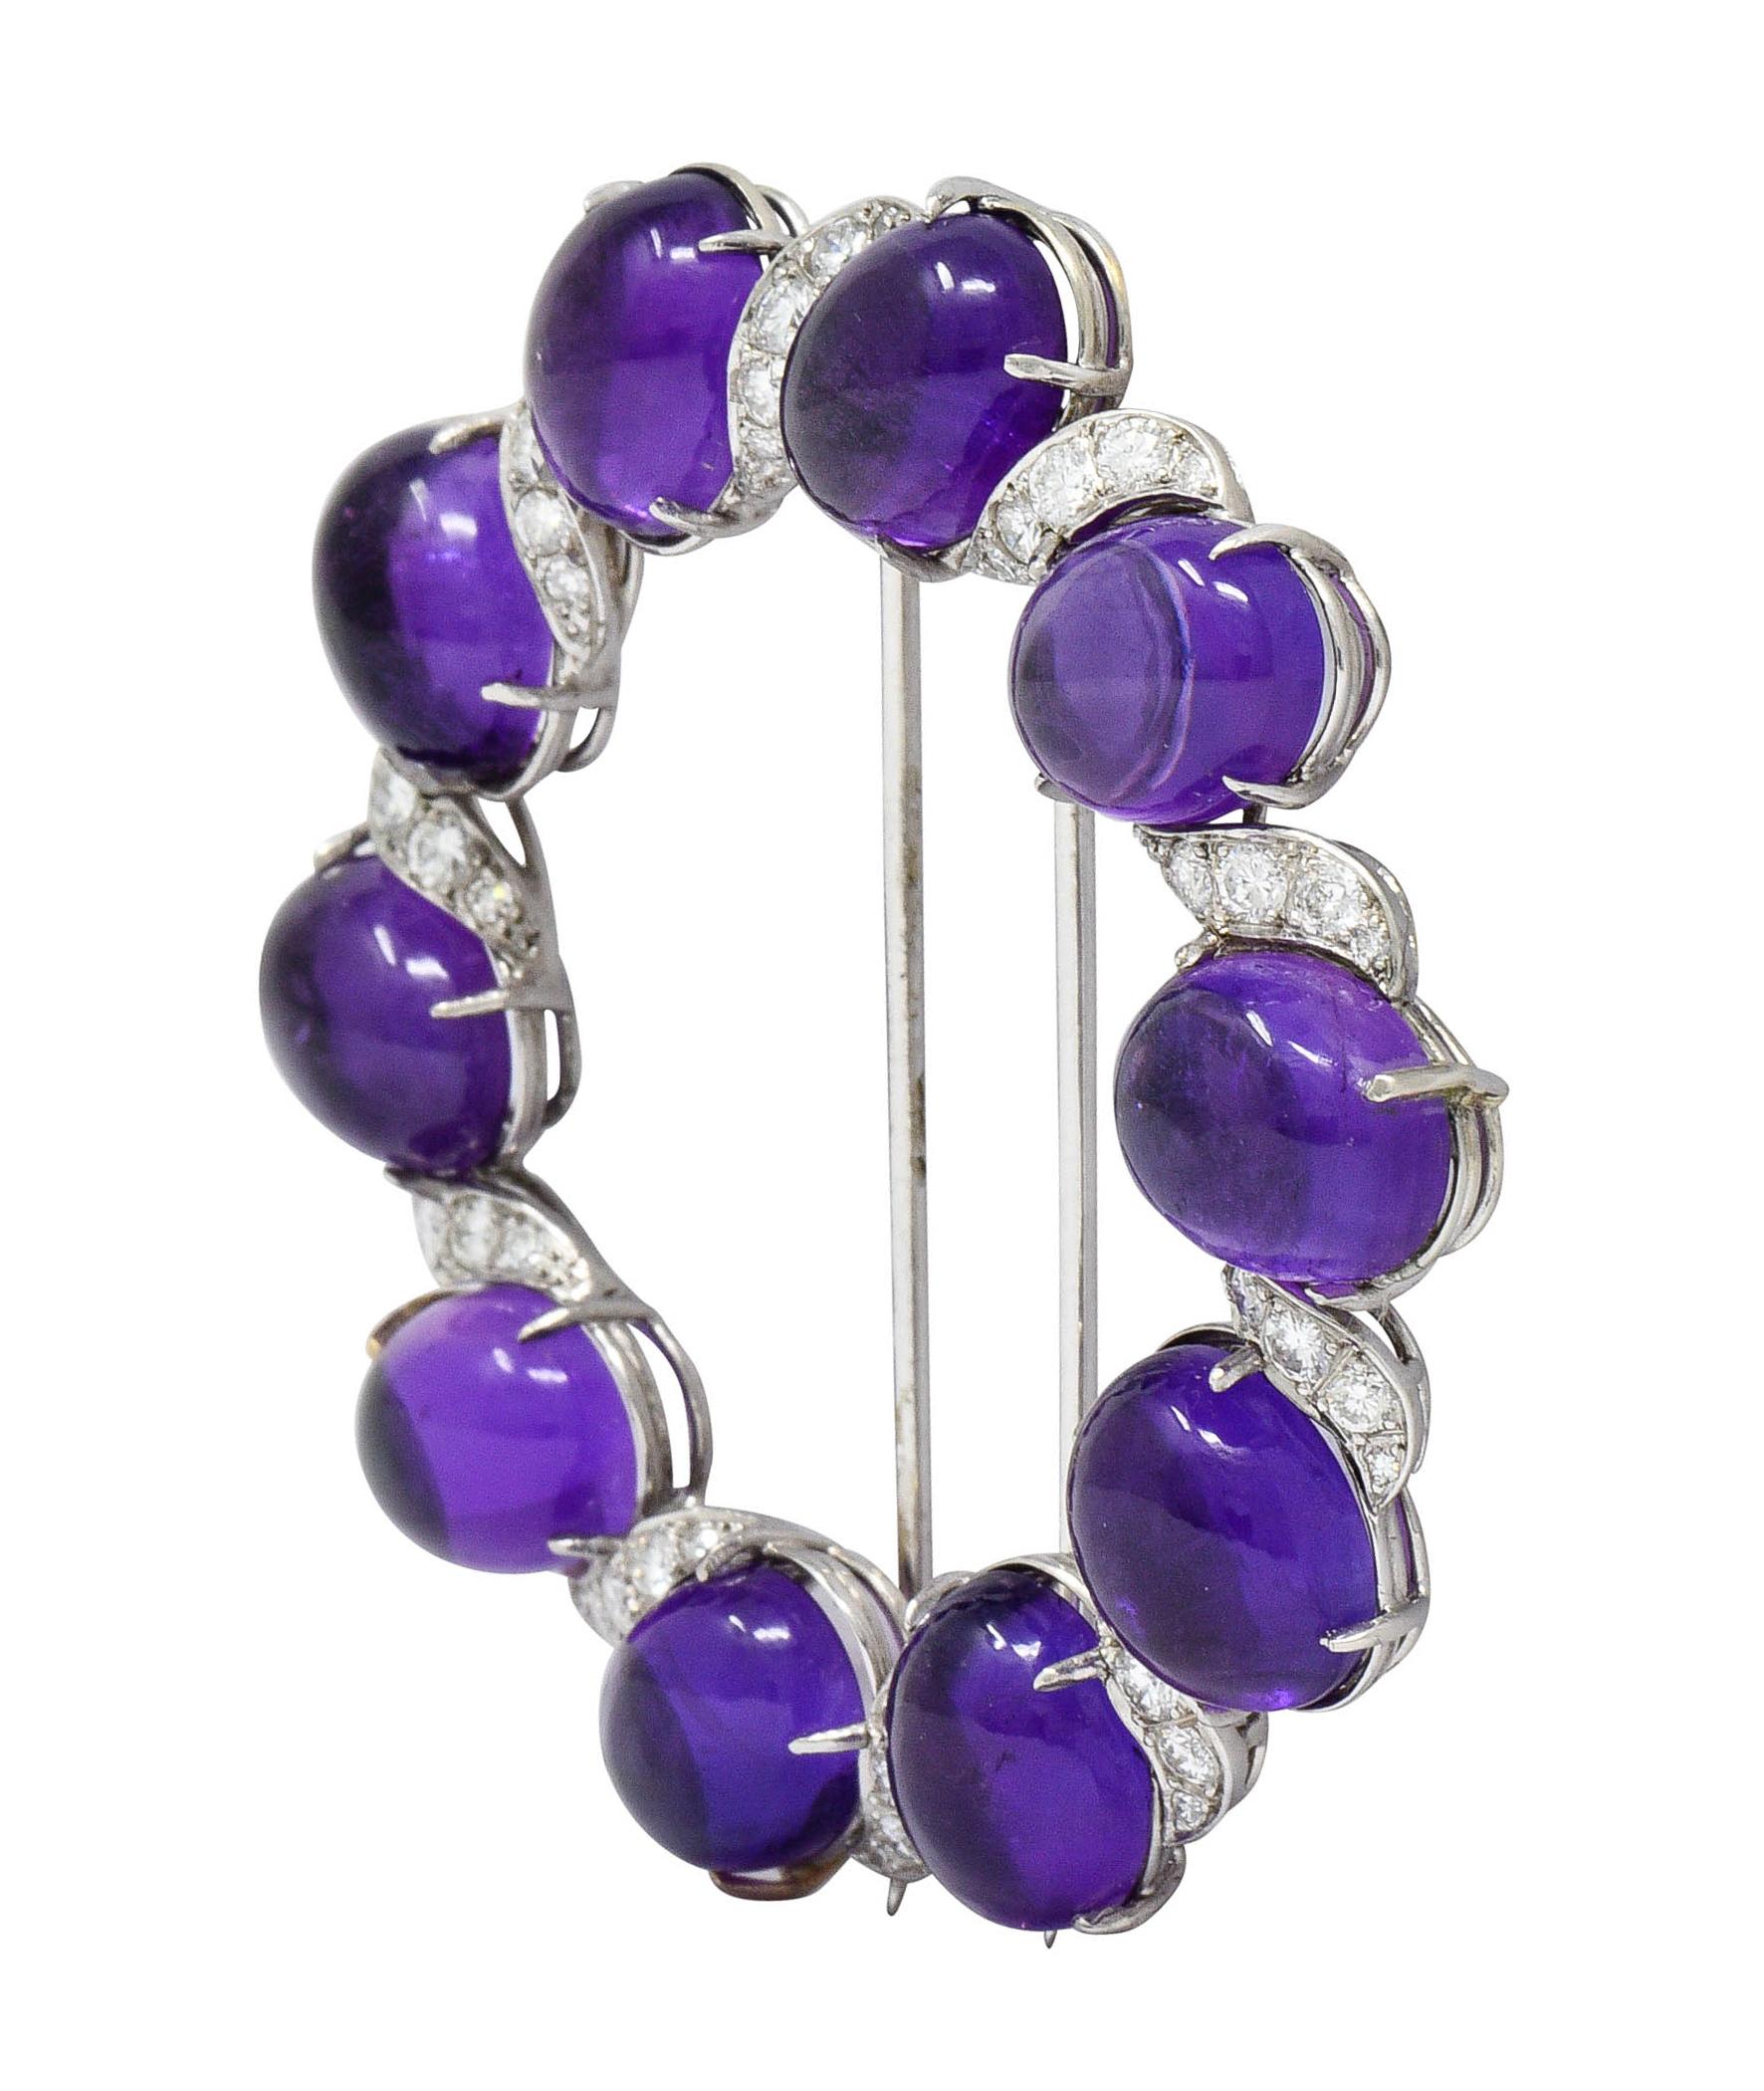 Circular brooch is comprised of ten oval amethyst cabochons; measuring approximately 10.0 x 8.5 mm

Very well-matched in purple color and translucent with natural inclusions

Alternating with swiveled white gold stations accented by round brilliant